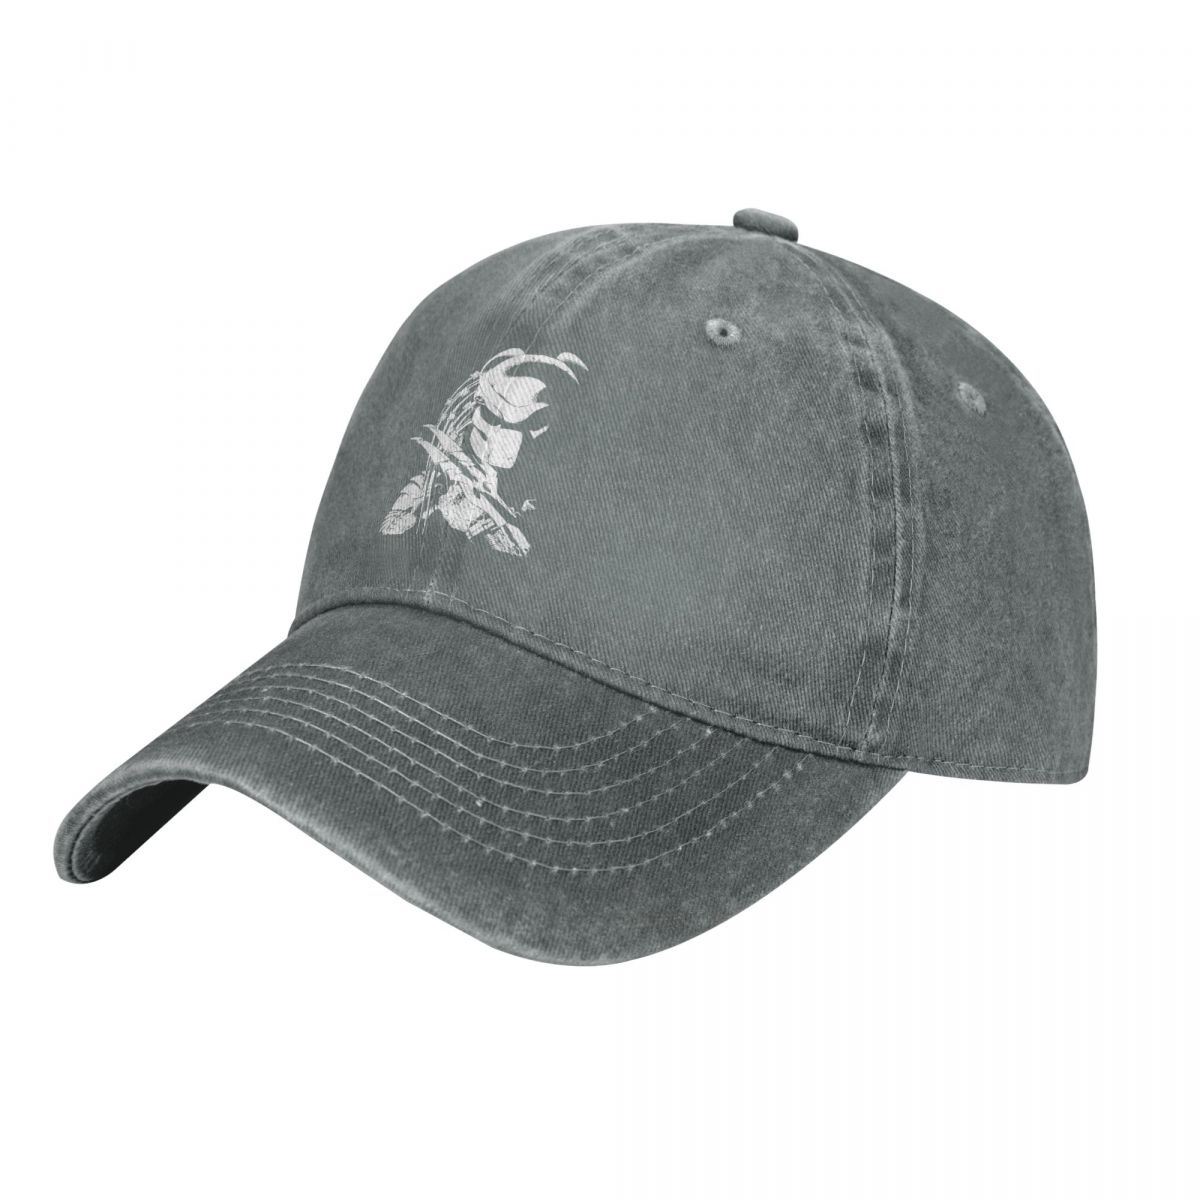 Predator - You Know It's Going Down - Snapback Baseball Cap - Summer Hat For Men and Women-Gray-One Size-